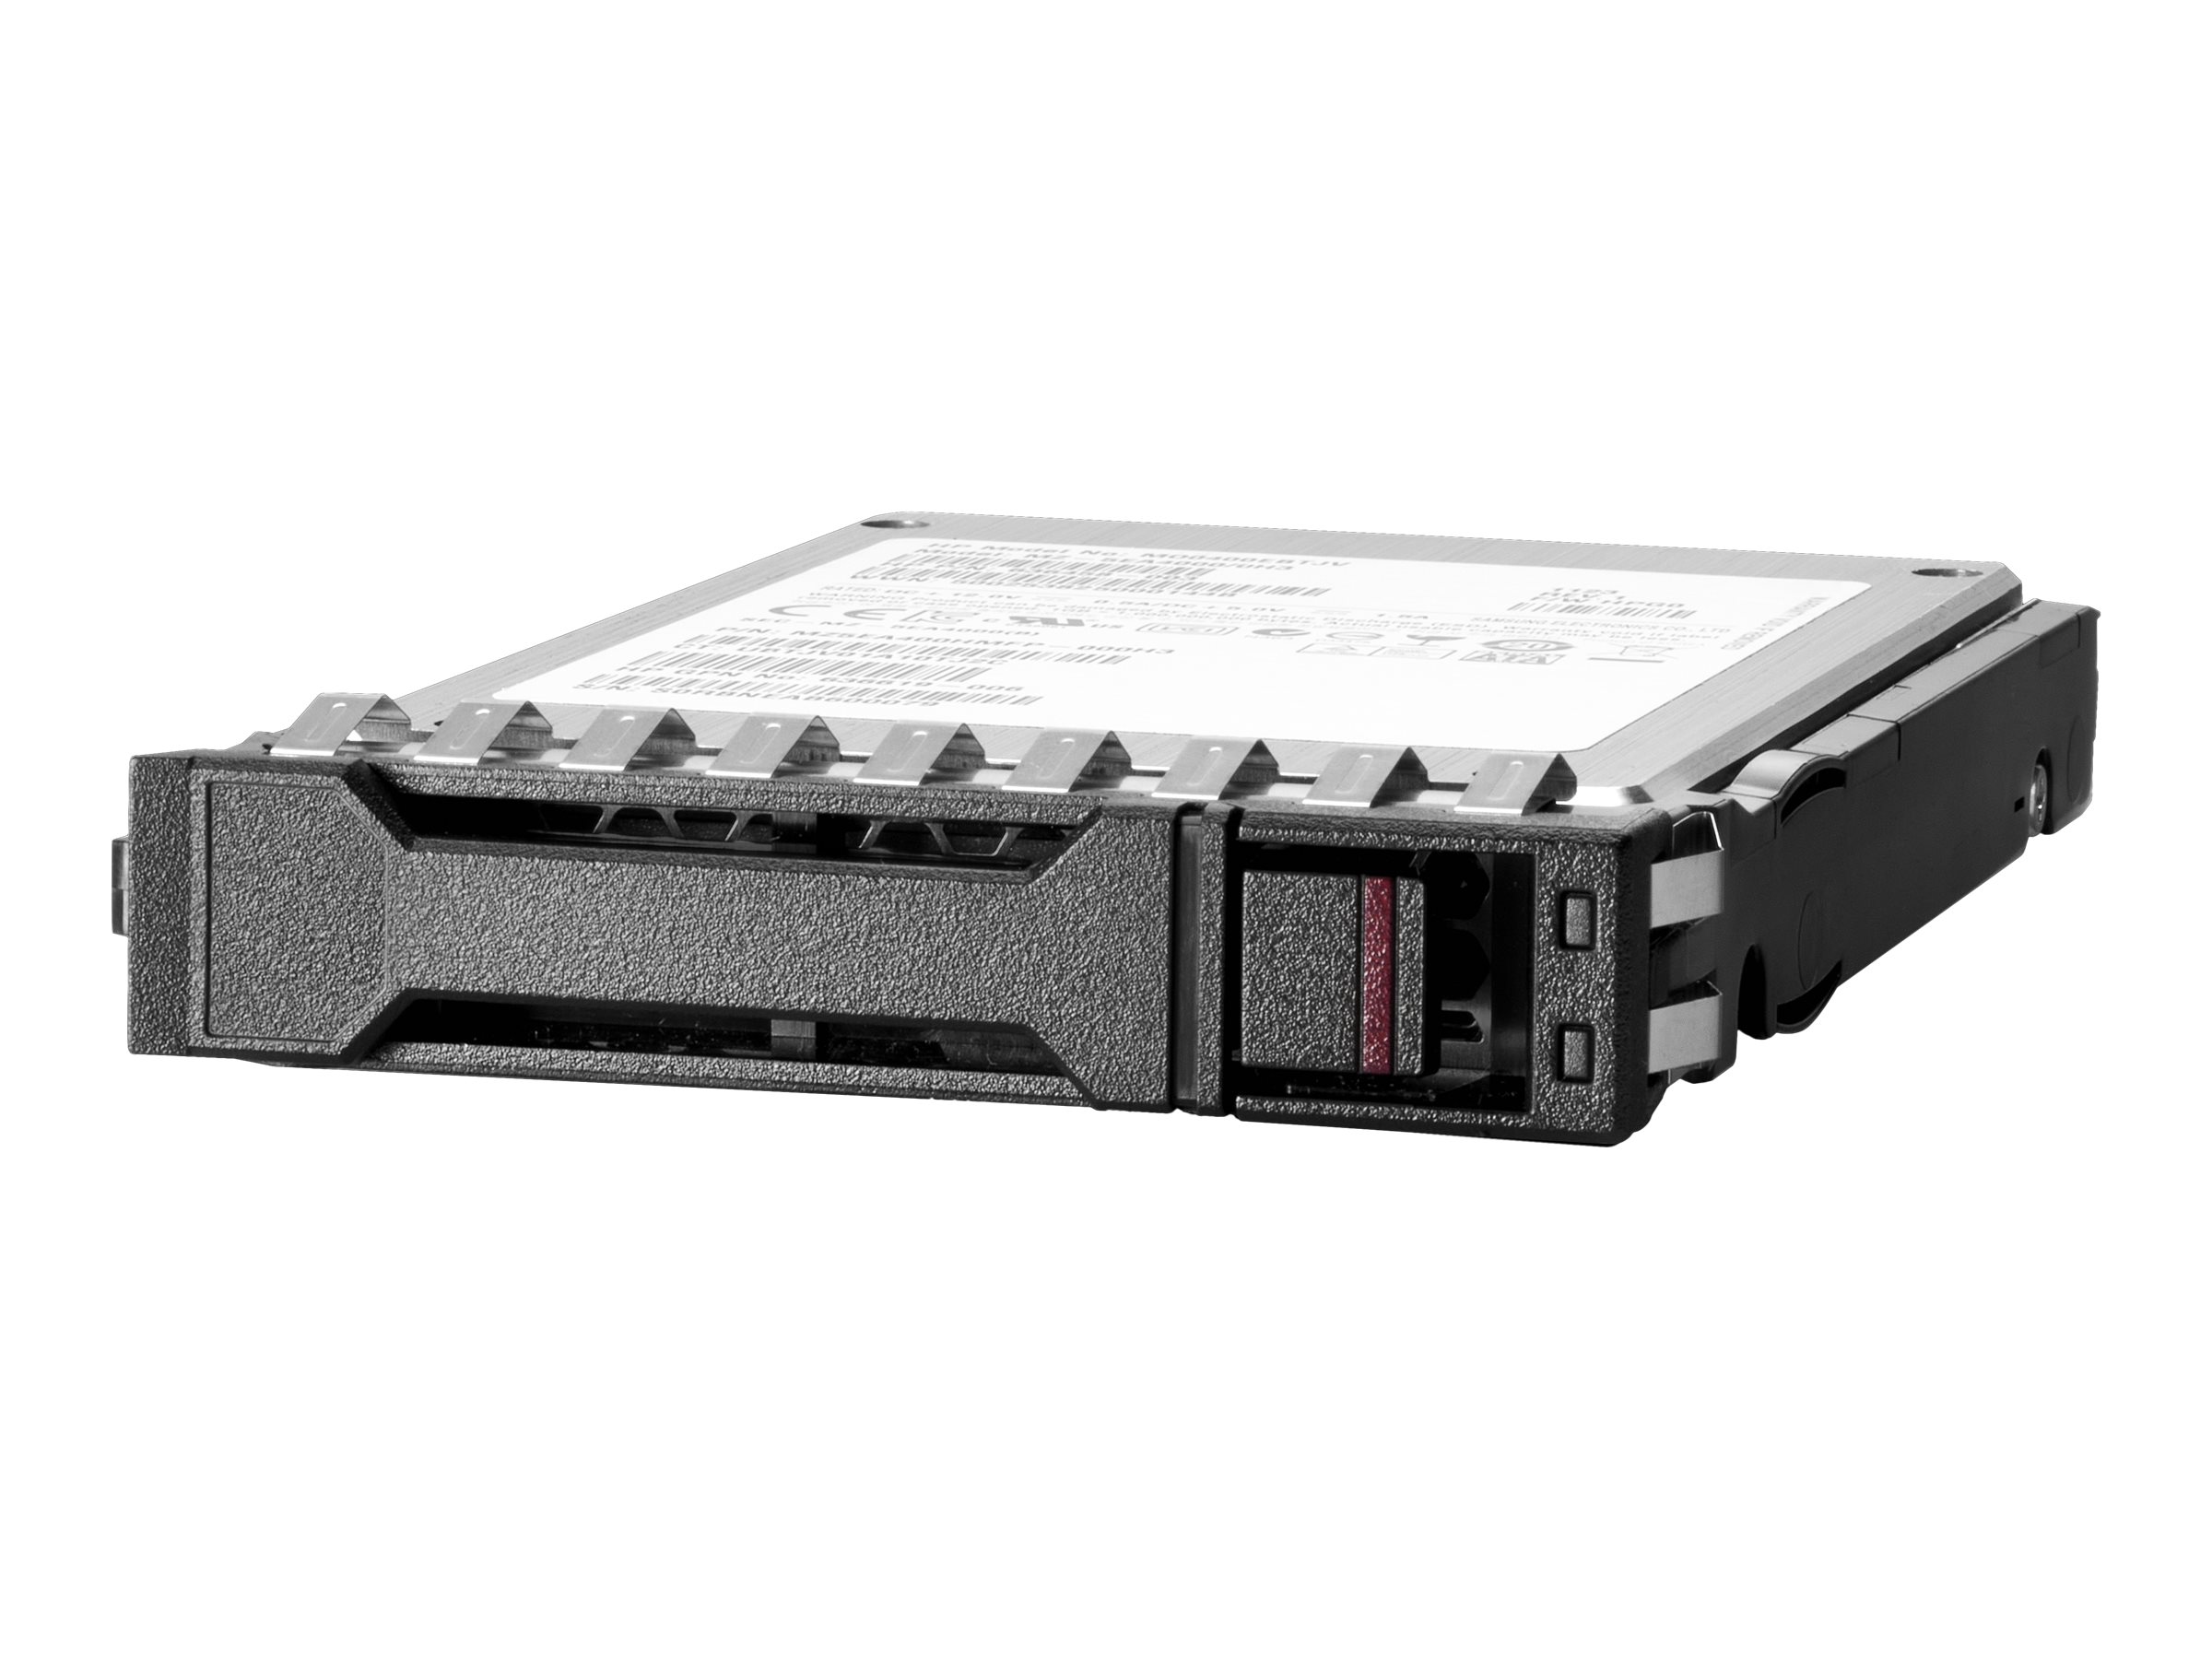 HPE - SSD - Mixed Use, High Performance - 6.4 TB - Hot-Swap - 2.5